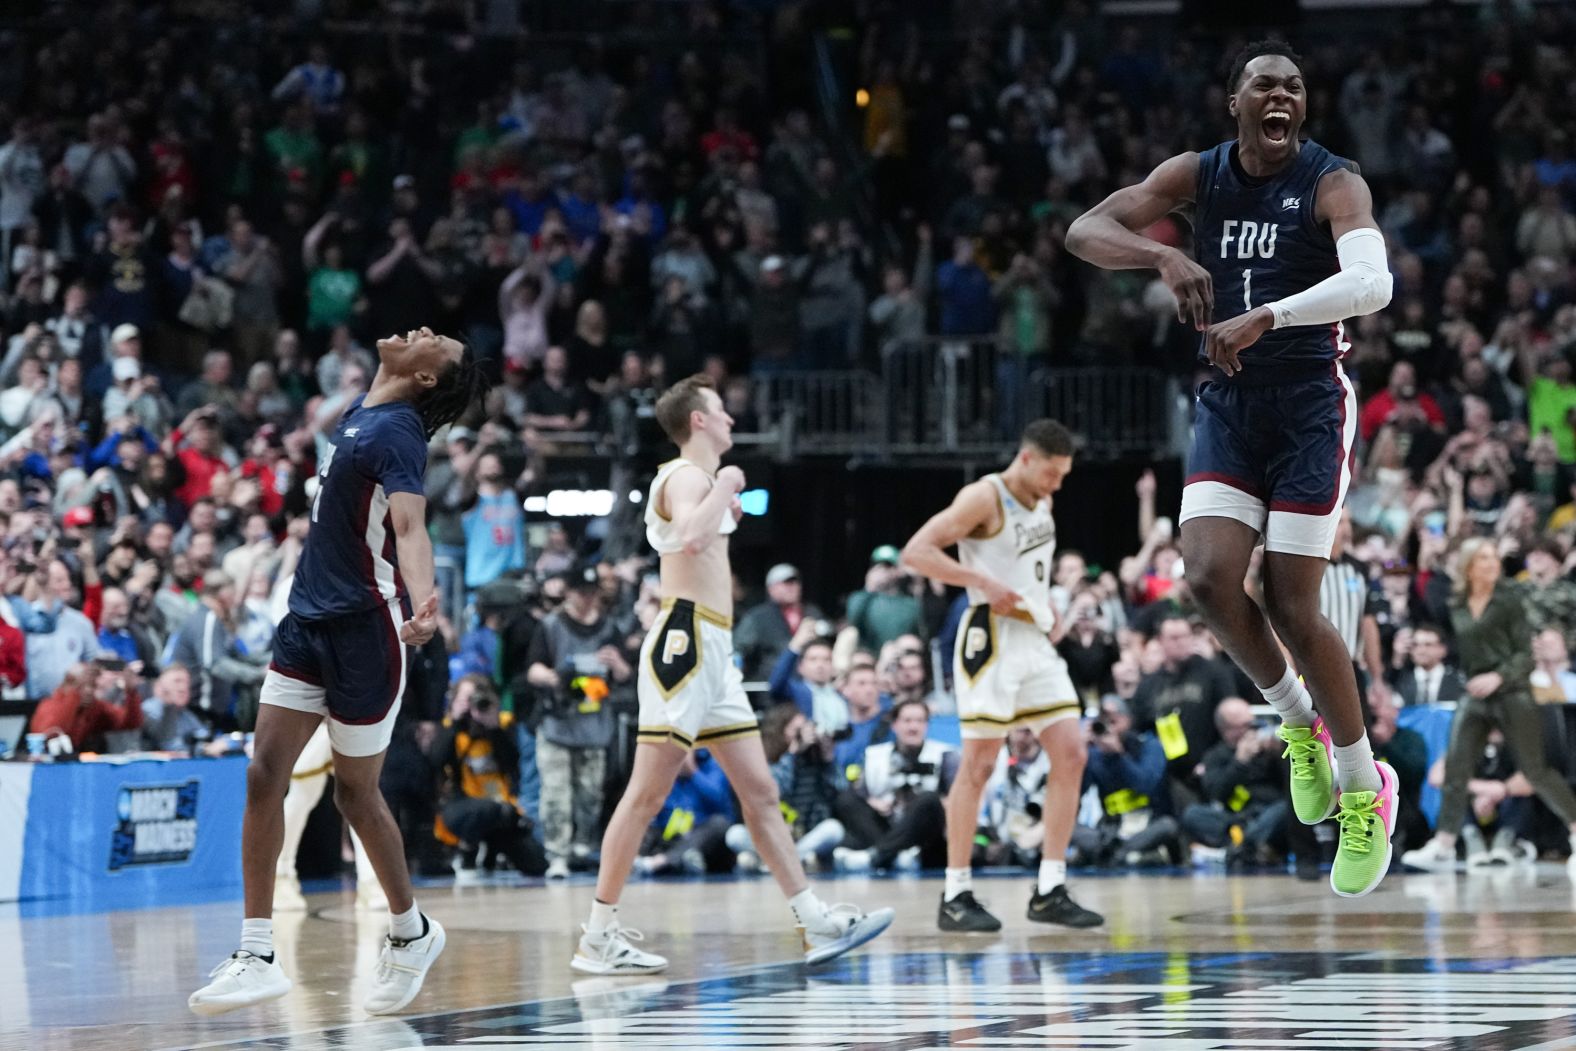 Joe Munden Jr., right, celebrates after <a href="index.php?page=&url=https%3A%2F%2Fwww.cnn.com%2F2023%2F03%2F17%2Fsport%2Fmarch-madness-ncaa-fdu-upsets-purdue%2Findex.html" target="_blank">Fairleigh Dickinson upset No. 1 seed Purdue</a> in the first round of the NCAA Tournament on Friday, March 17. It is only the second time in history that a No. 16 seed has defeated a No. 1.